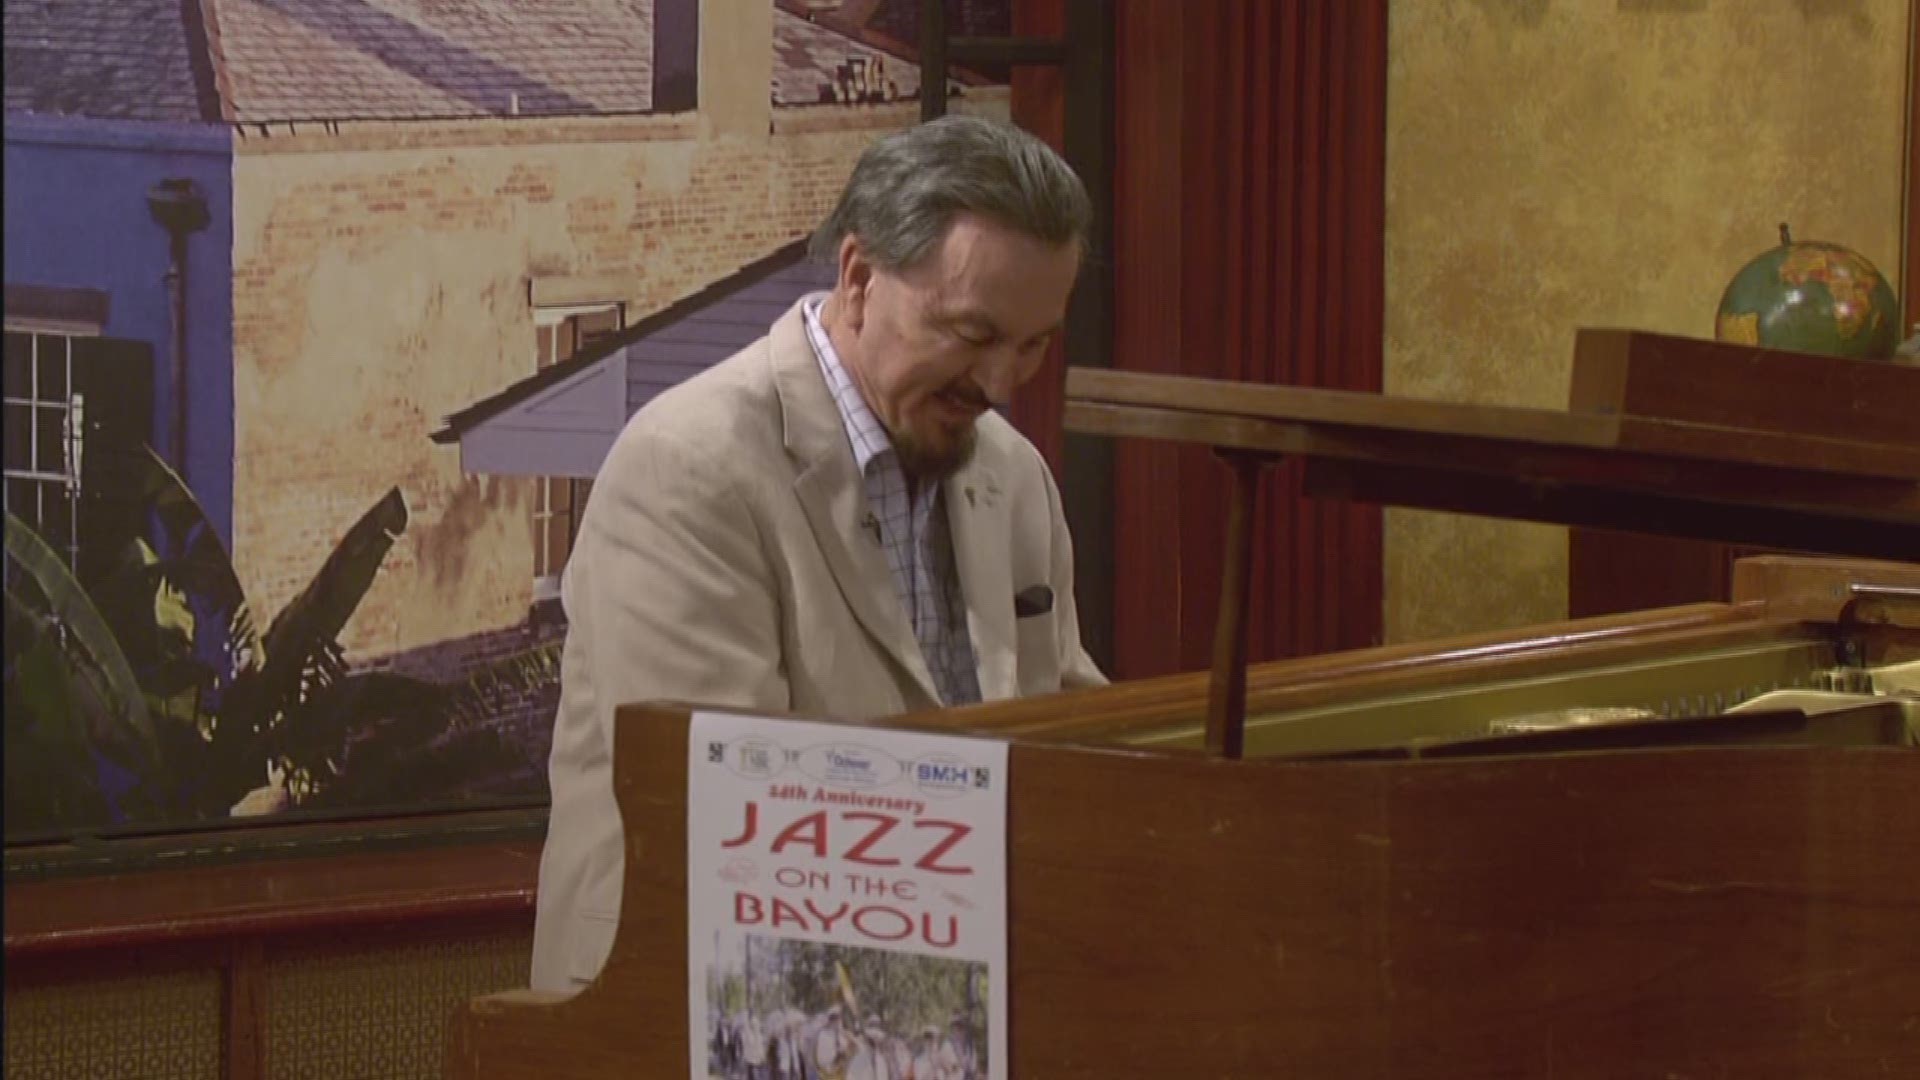 Ronnie Kole is hosting the annual Jazz on the Bayou at his home this weekend, and he talks about how the event benefits Easter Seals Louisiana and Starc.